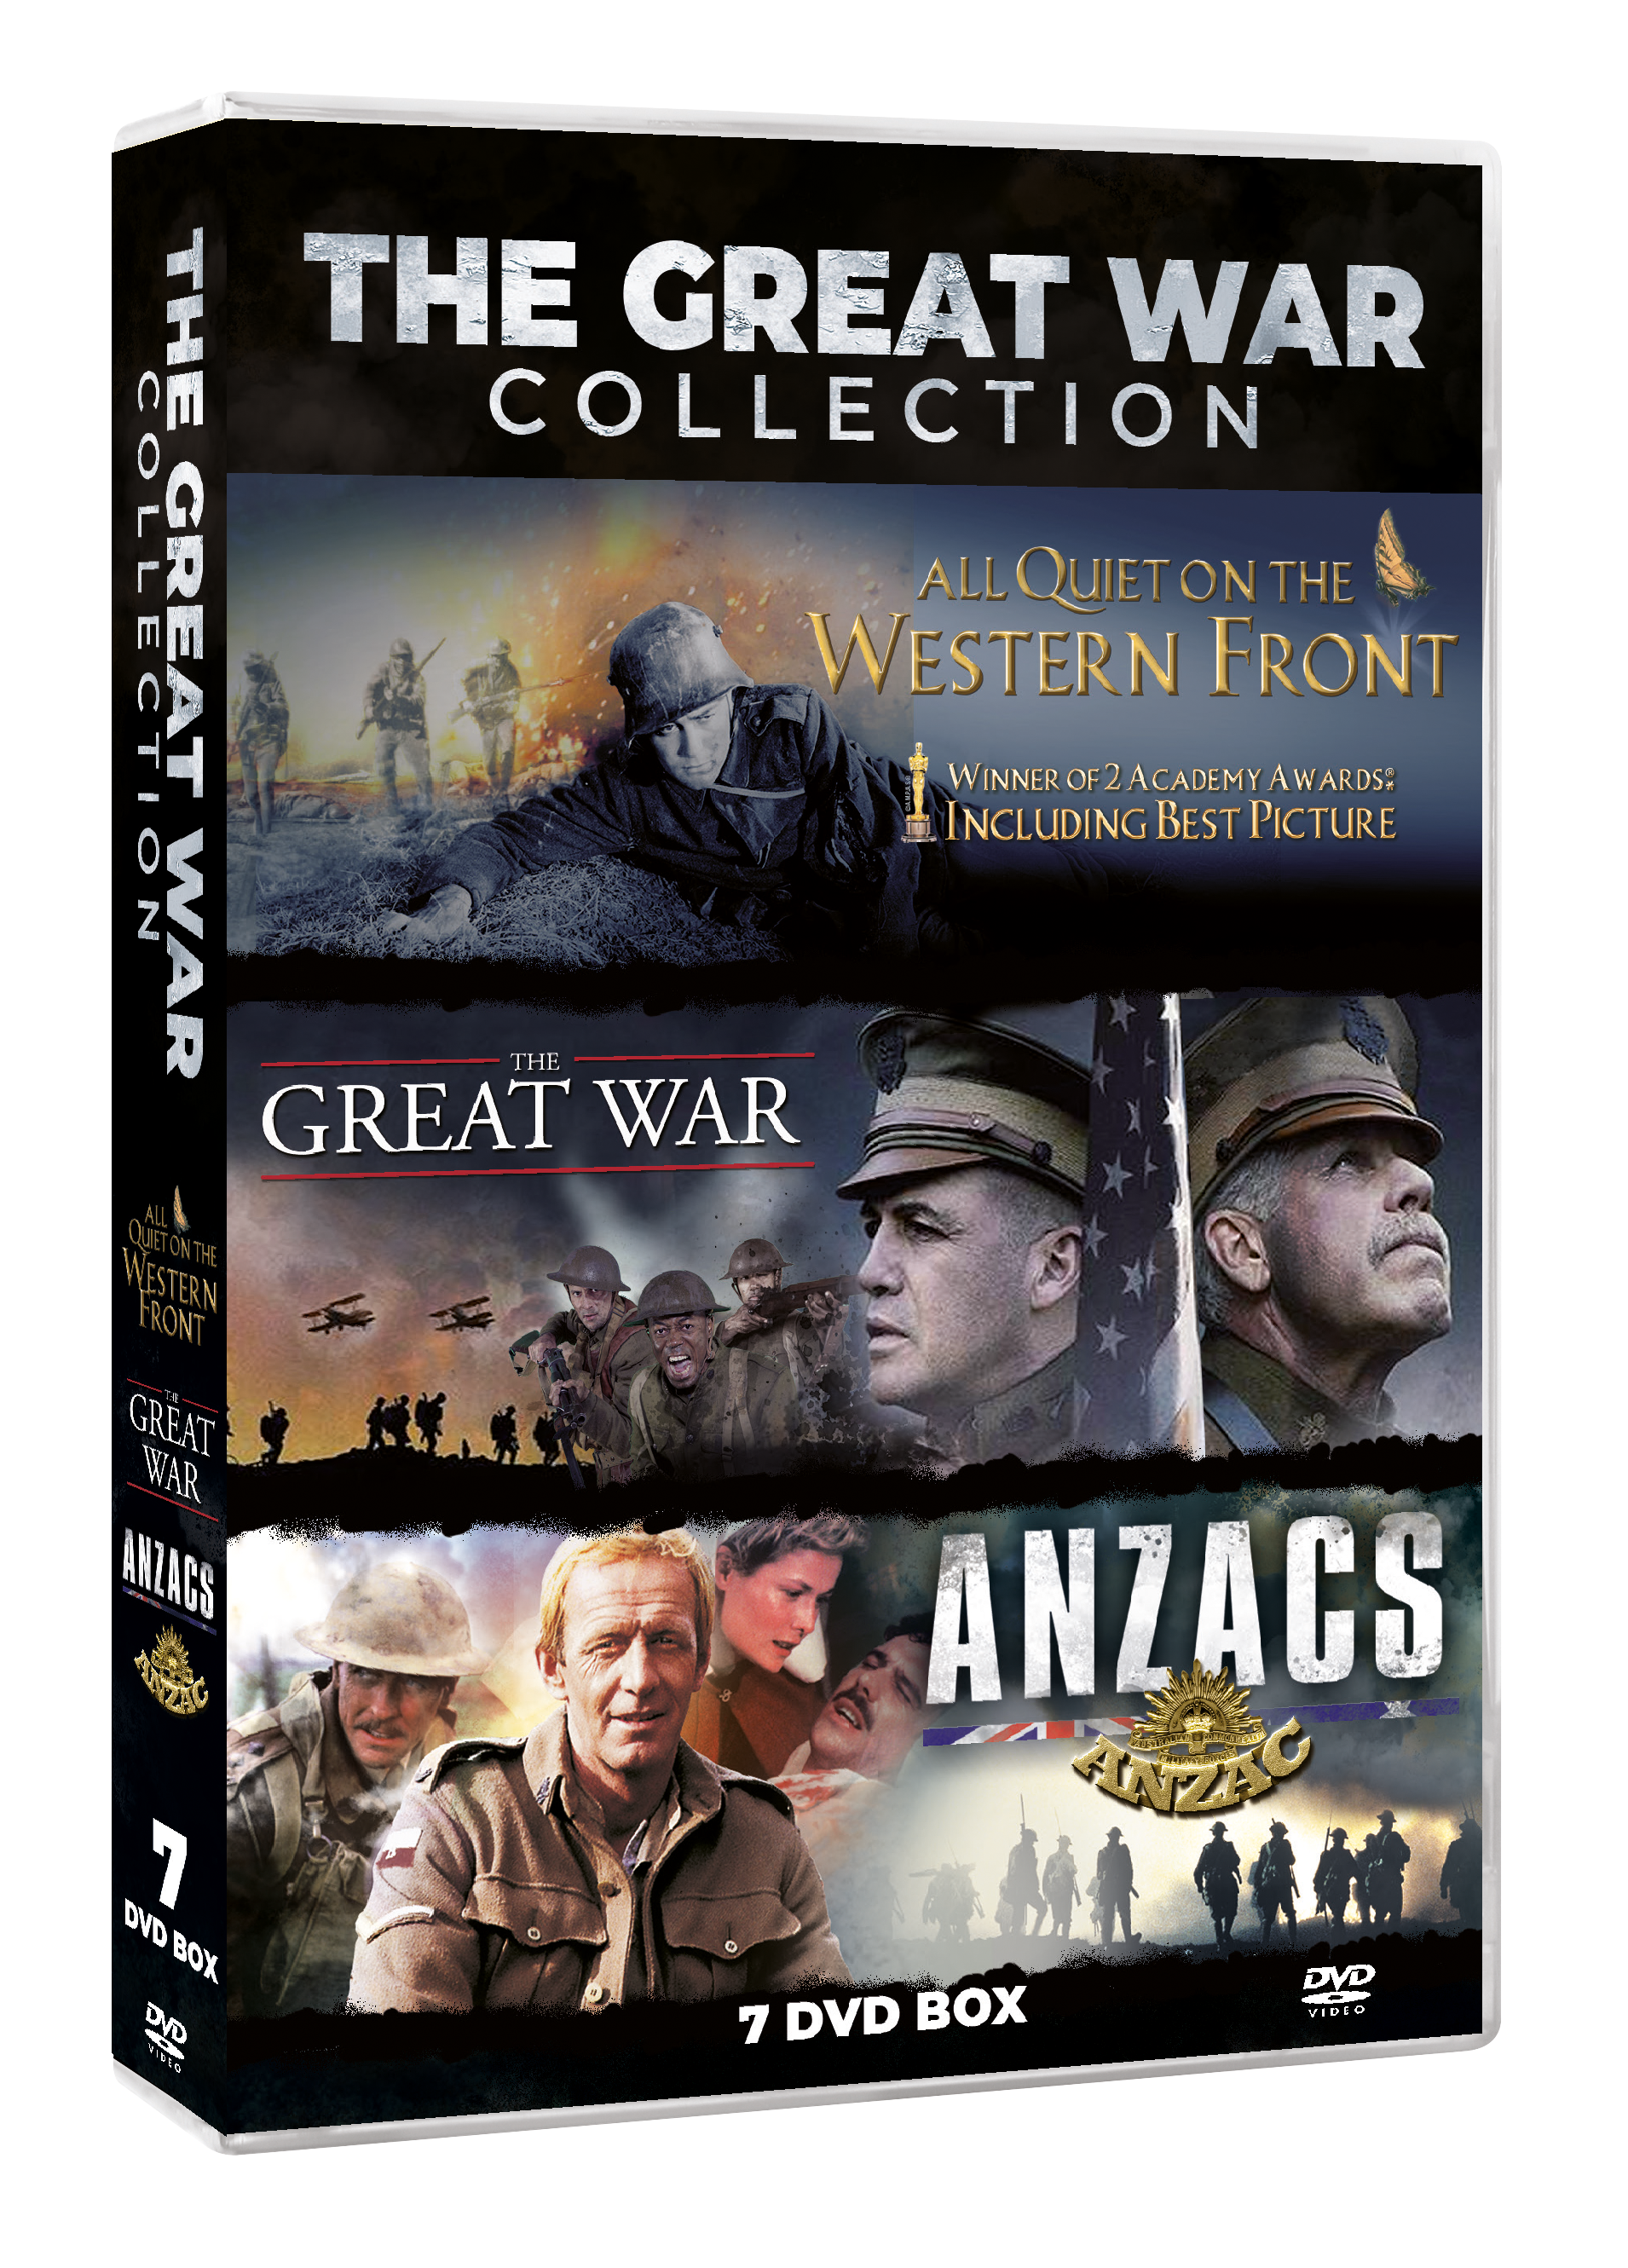 THE GREAT  WORLD WAR 1 COLLECTION (7DVD BOX SET: LIMITED EDITION CONTAINS:  Anzacs 5DVD MINISERIES - Great War 1 DVD - All Quiet on the Western Front 1 DVD Oscar Winner von Classic Movies